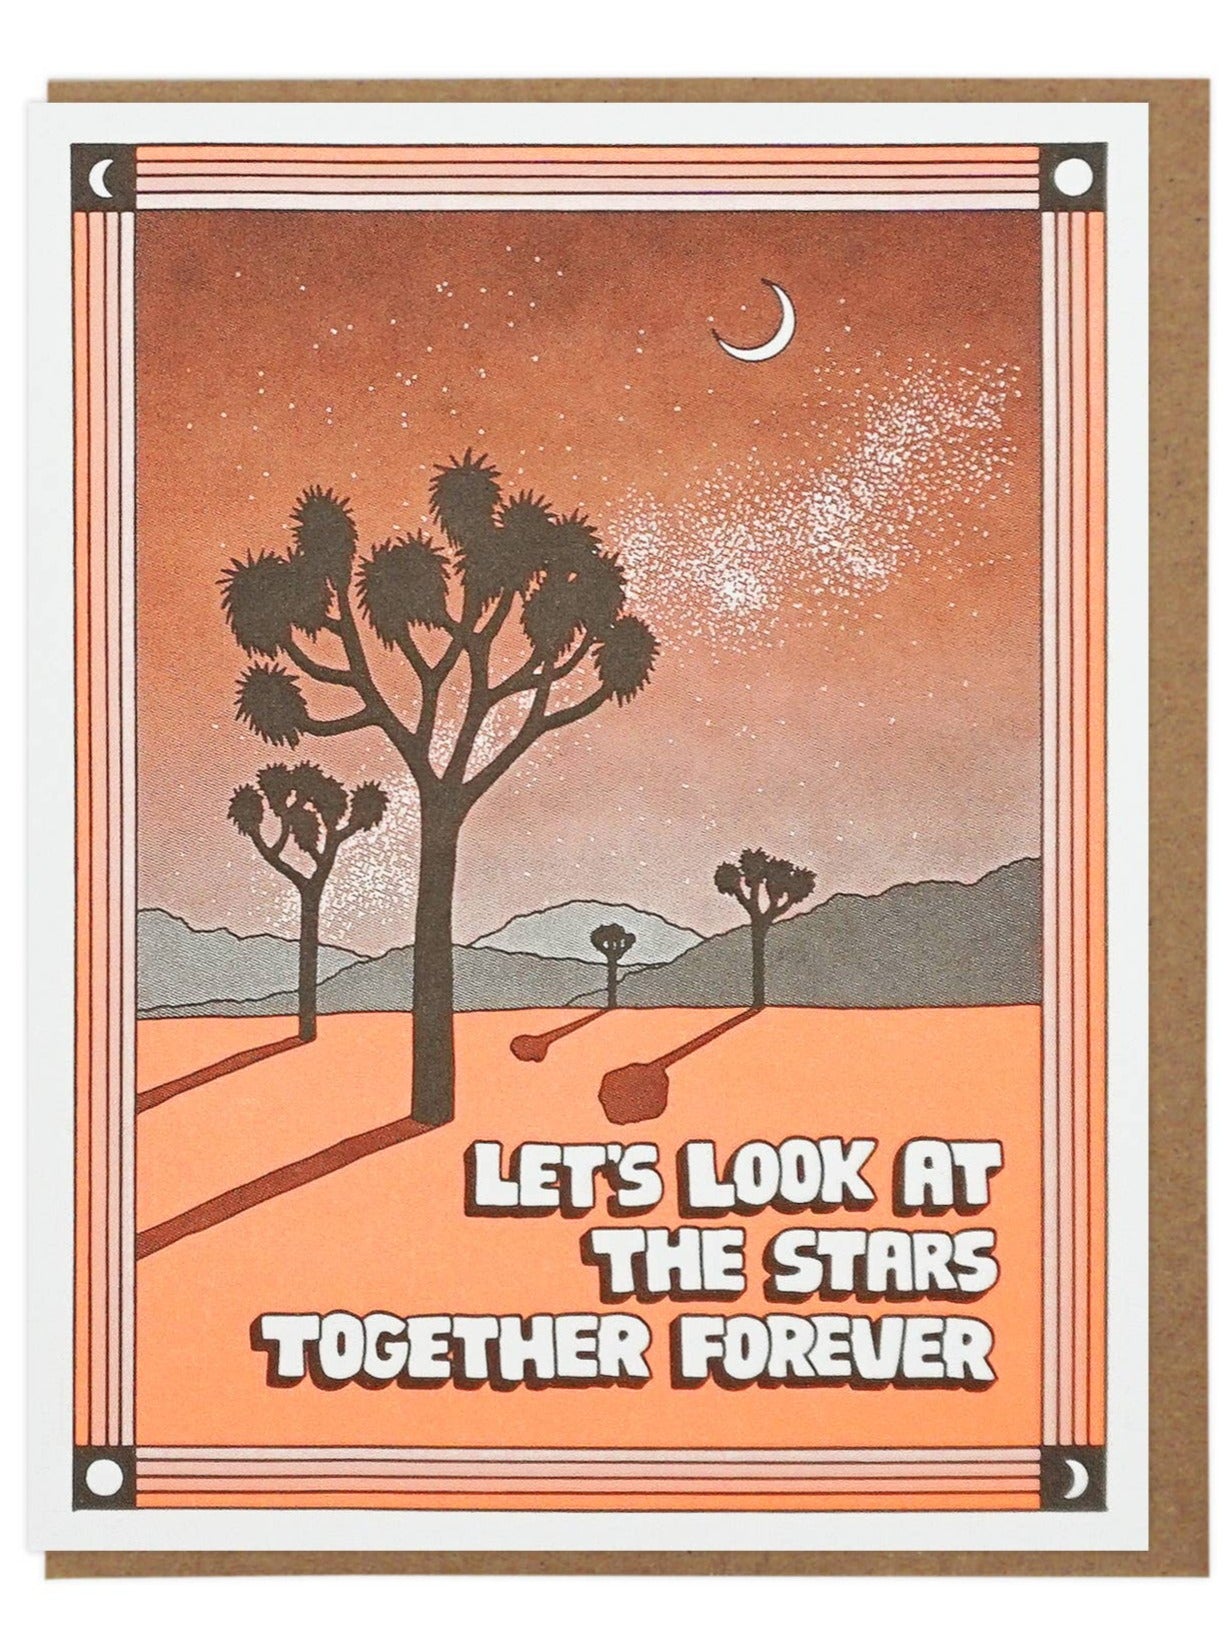 The Stars Together Forever Greeting Card